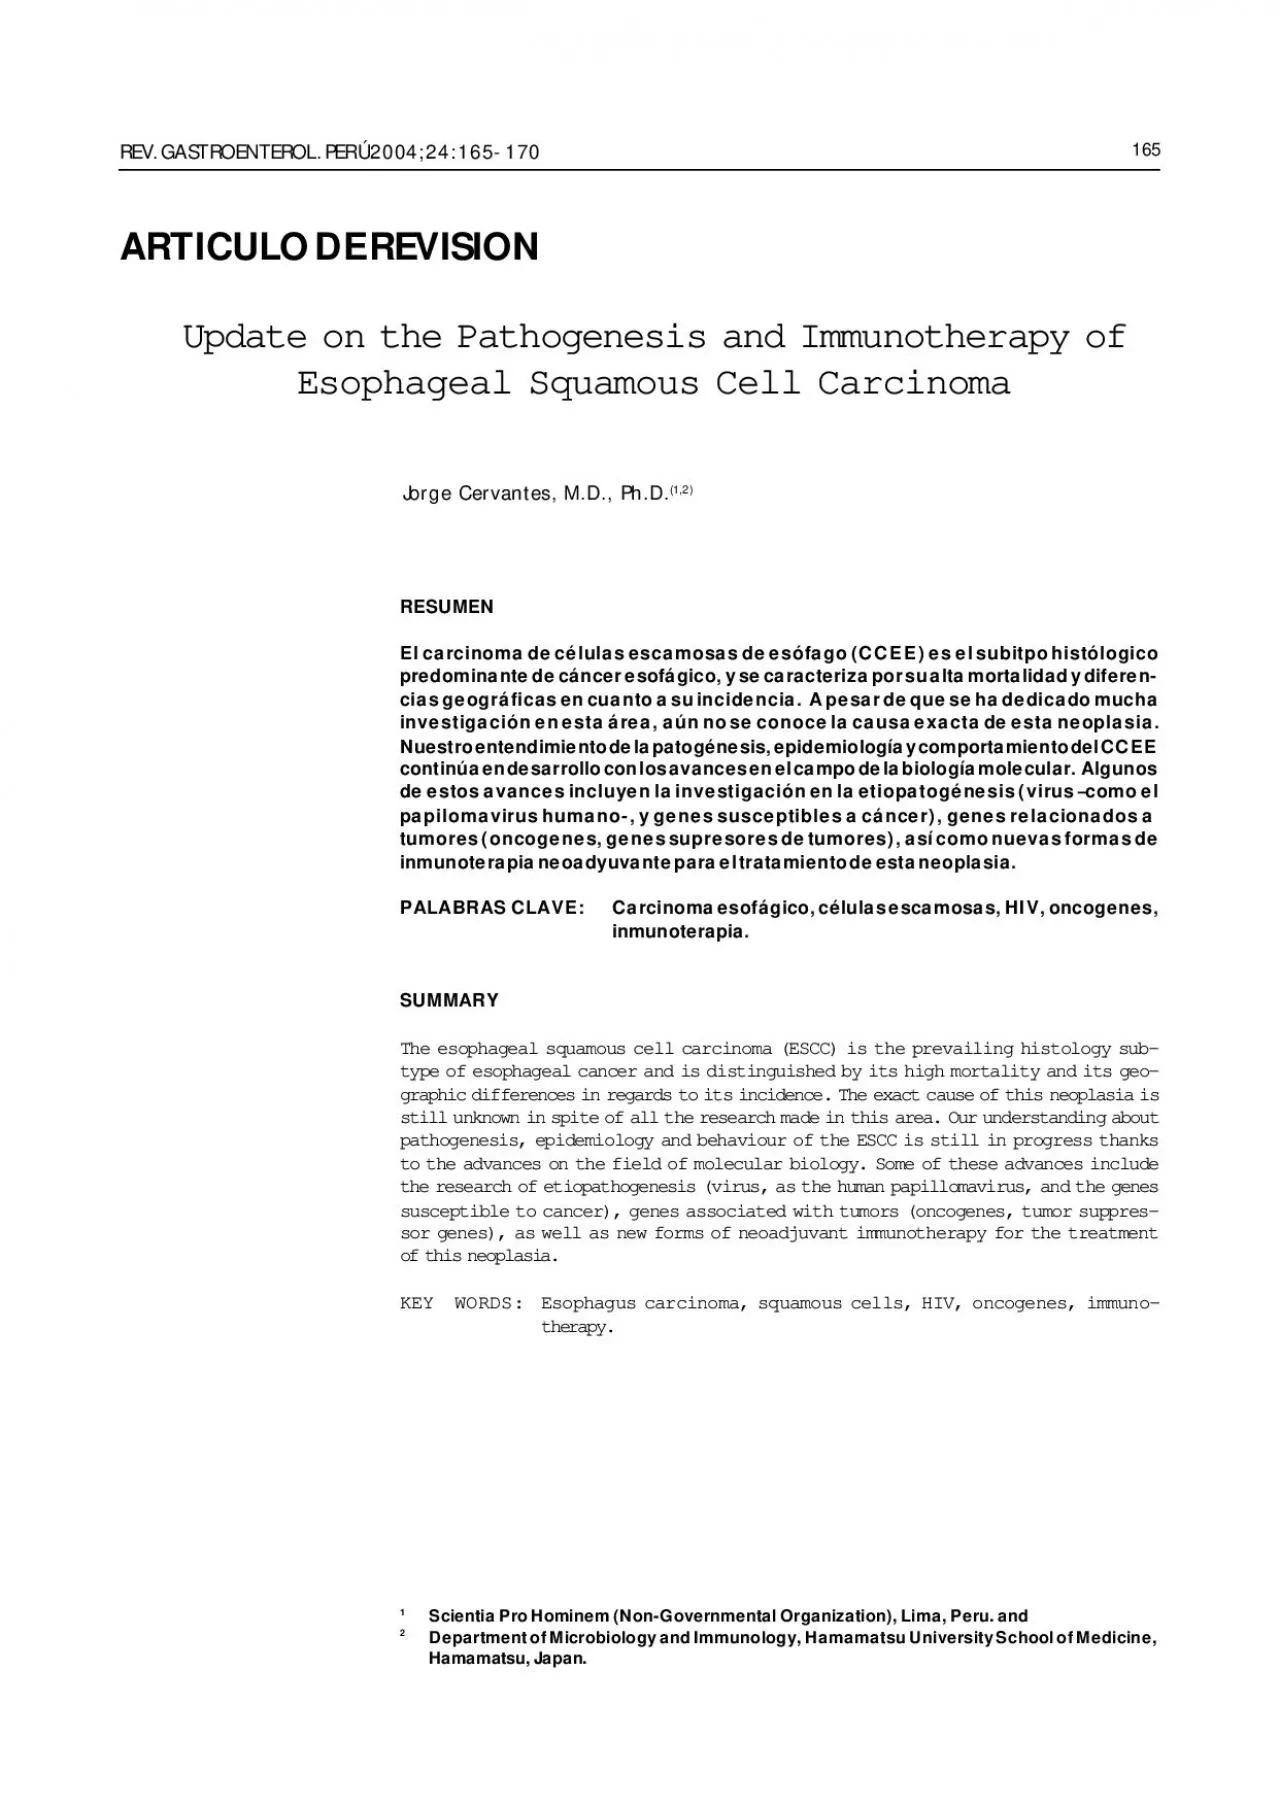 UPDATE ON THE PATHOGENESIS AND IMMUNOTHERAPY OF ESOPHAGEAL SQUAMOUS CE